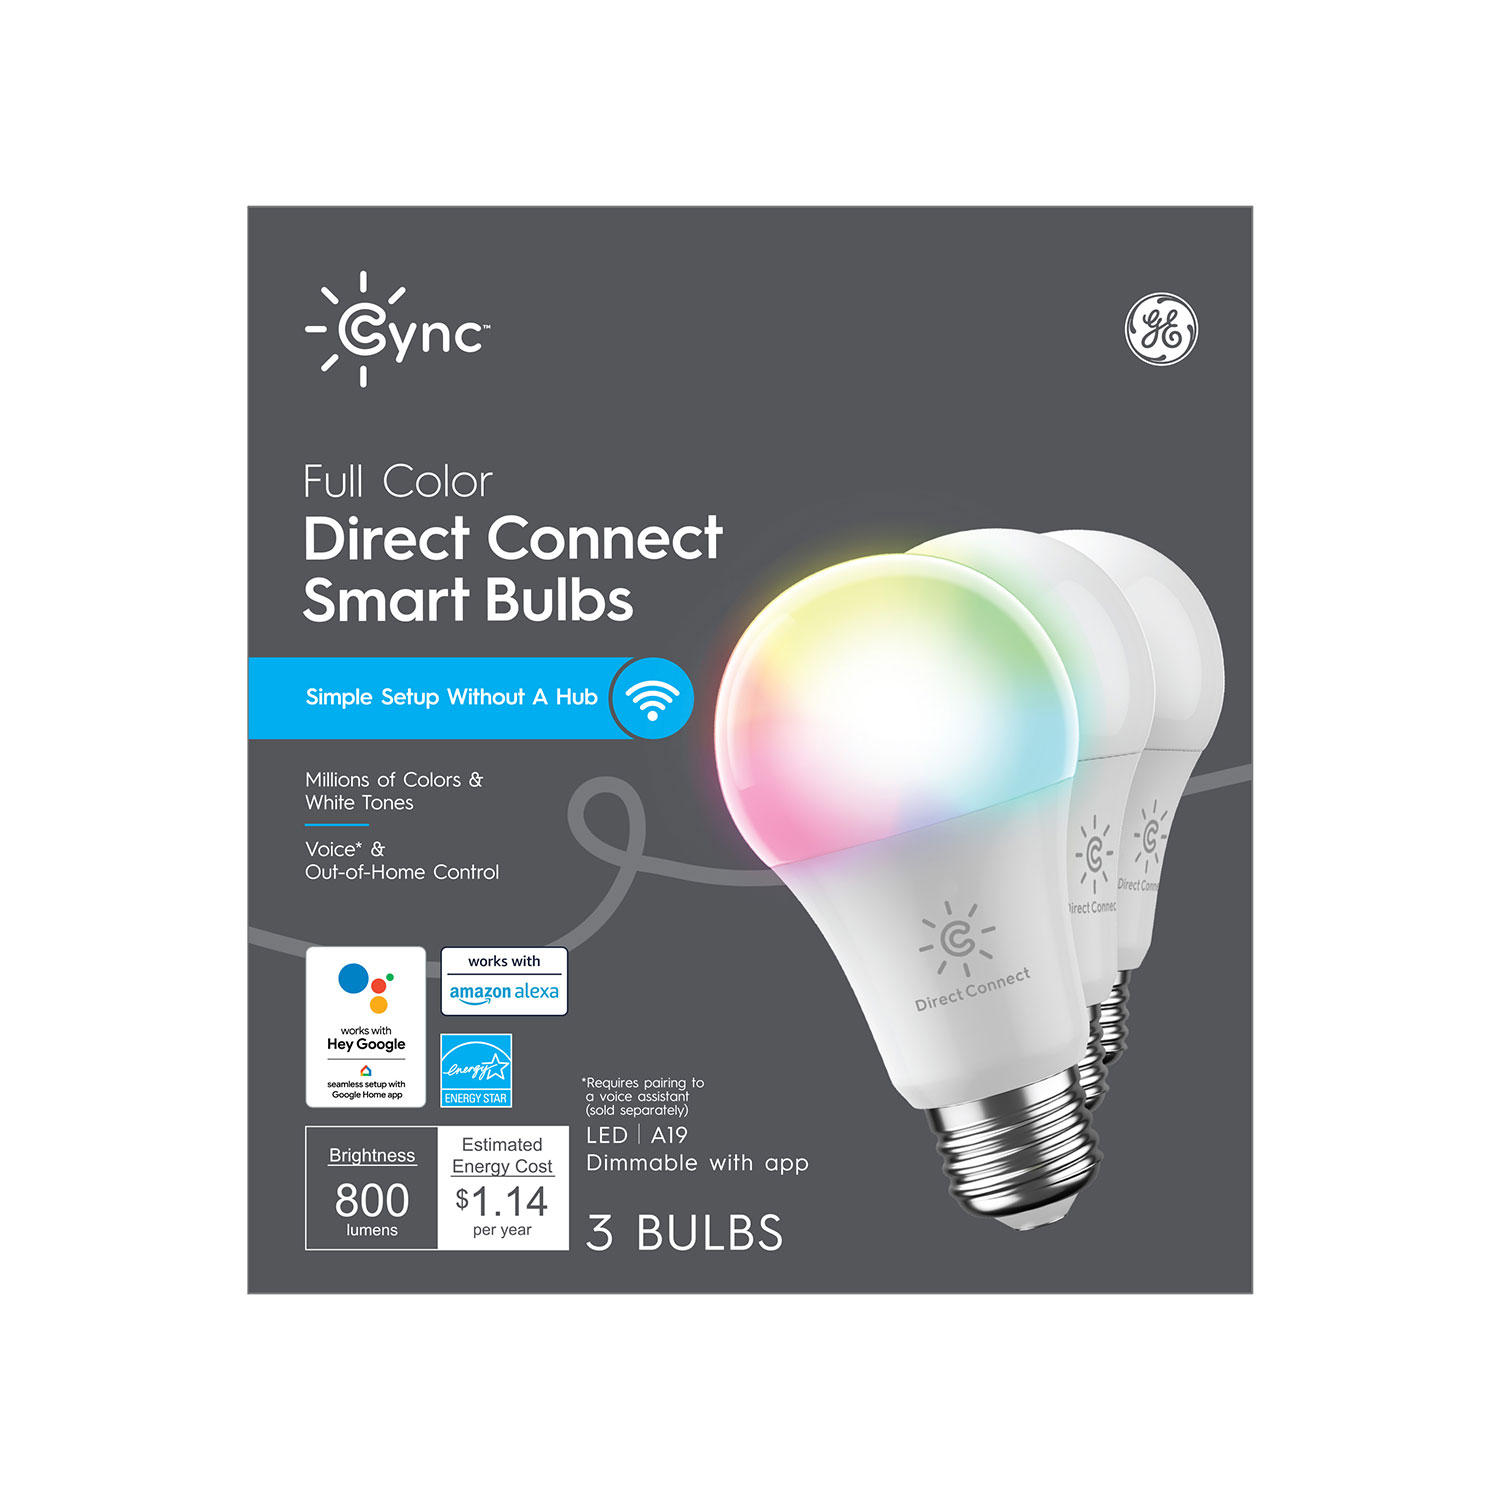 3-Pack GE Cync LED 9W (60W Replacement) Smart Home Direct Connect Full Color A19 Bulbs